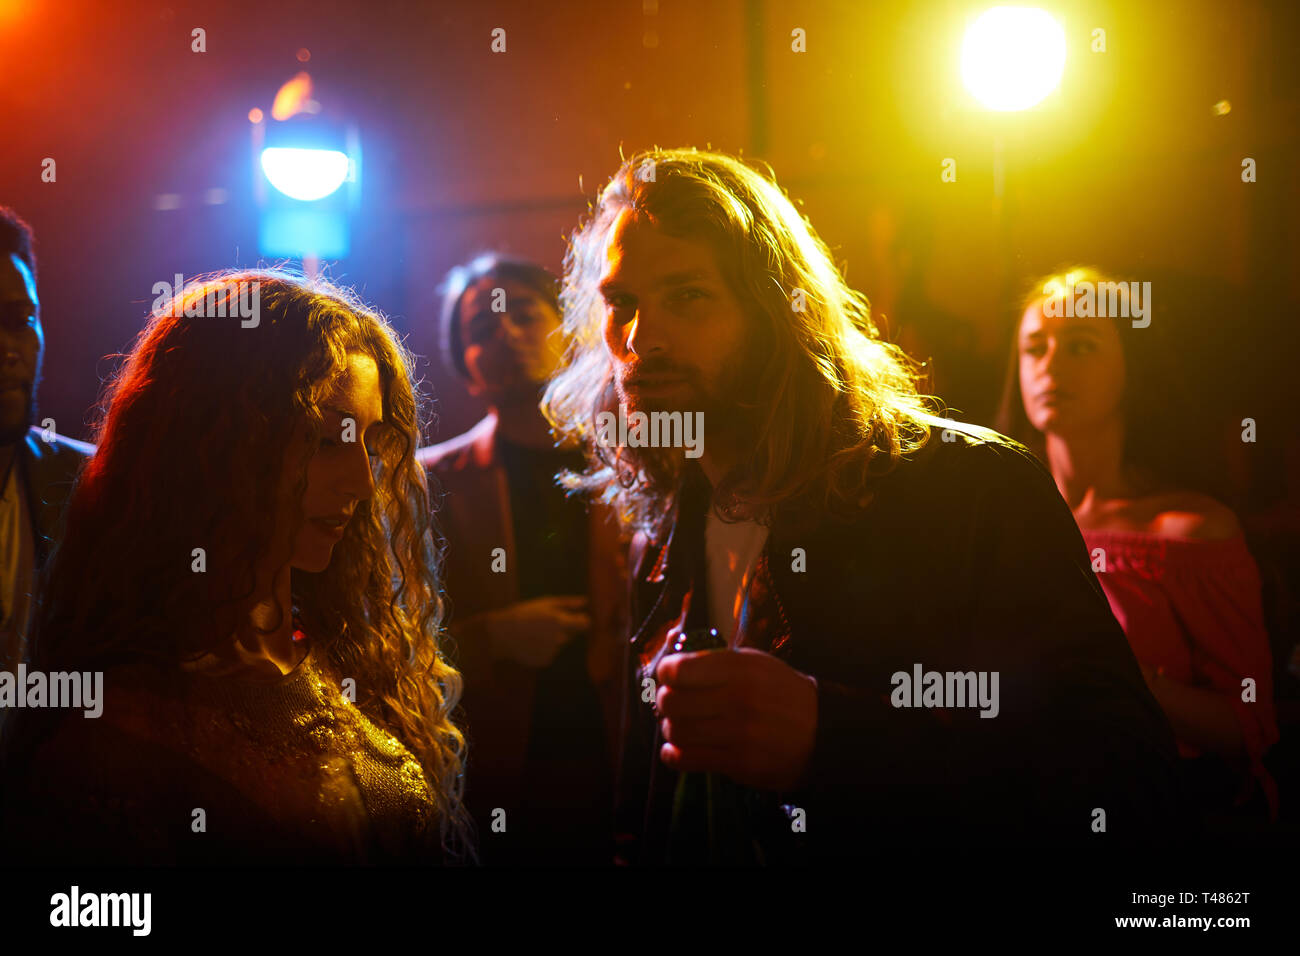 Long-haired guy at party Banque D'Images